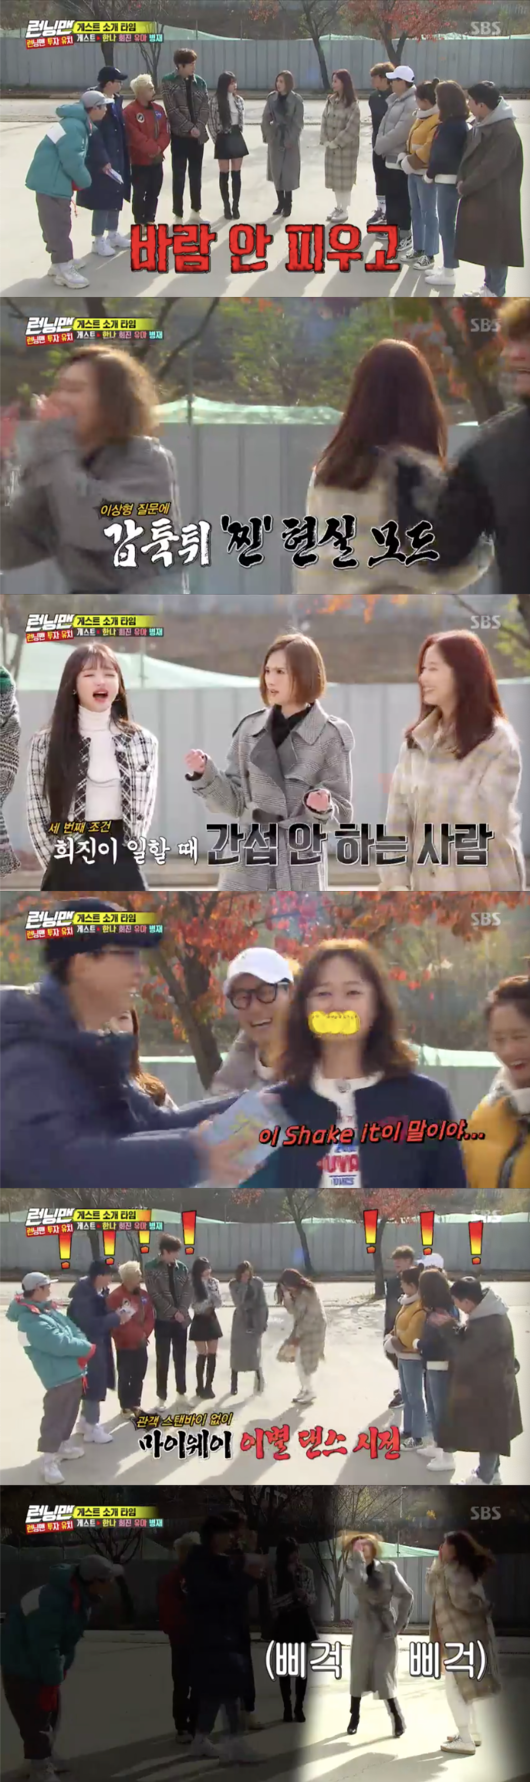 Lee Hee-Jin, who visited Running Man, honestly said that his ideal type is a person who does not cheat.Actors Kang Han-Na, Lee Hee-Jin, Oh My Girls infant and broadcaster Yoo Byung-jae appeared as guests on SBSs Sunday is Good - Running Man (hereinafter referred to as Running Man) broadcast on the 8th.Kang Han-Na appeared in three weeks after the separation, and Yoo Jae-Suk was glad that this is not fixed.Kang Han-Na laughed, saying, I was lying in my bed since the broadcast, but now Im out in the living room.Lee Hee-Jin appeared and Yoo Jae-Suk mentioned that he rejected the bouquet proposal at Kan Mi-youns marriage ceremony.Lee Hee-Jin said, I was not confident to marriage in six months, and Yoo Jae-Suk said, I can keep receiving it before six months.Lee Hee-Jin, who first appeared in Running Man and was nervous, said that Yoo Jae-Suk would not talk about ideal type when he appeared in entertainment, and Lee Hee-Jin said, ideal type was always a sticker.When Yoo Jae-Suk asked what ideal type is these days, Lee Hee-Jin said frankly, Now ideal type is a person who does not cheat, does his work hard, and does not interfere when I work.The members of Running Man said, I was right, I have pain at first sight, and Jeon So-min went forward and said, This bad XX.Dont cheat on me, he said, blowing out Cider instead.Kang Han-Na later demonstrated farewell dance, which was shown three weeks ago, and made everyone laugh by farewell dance with Lee Hee-Jin.SBS Running Man broadcast capture